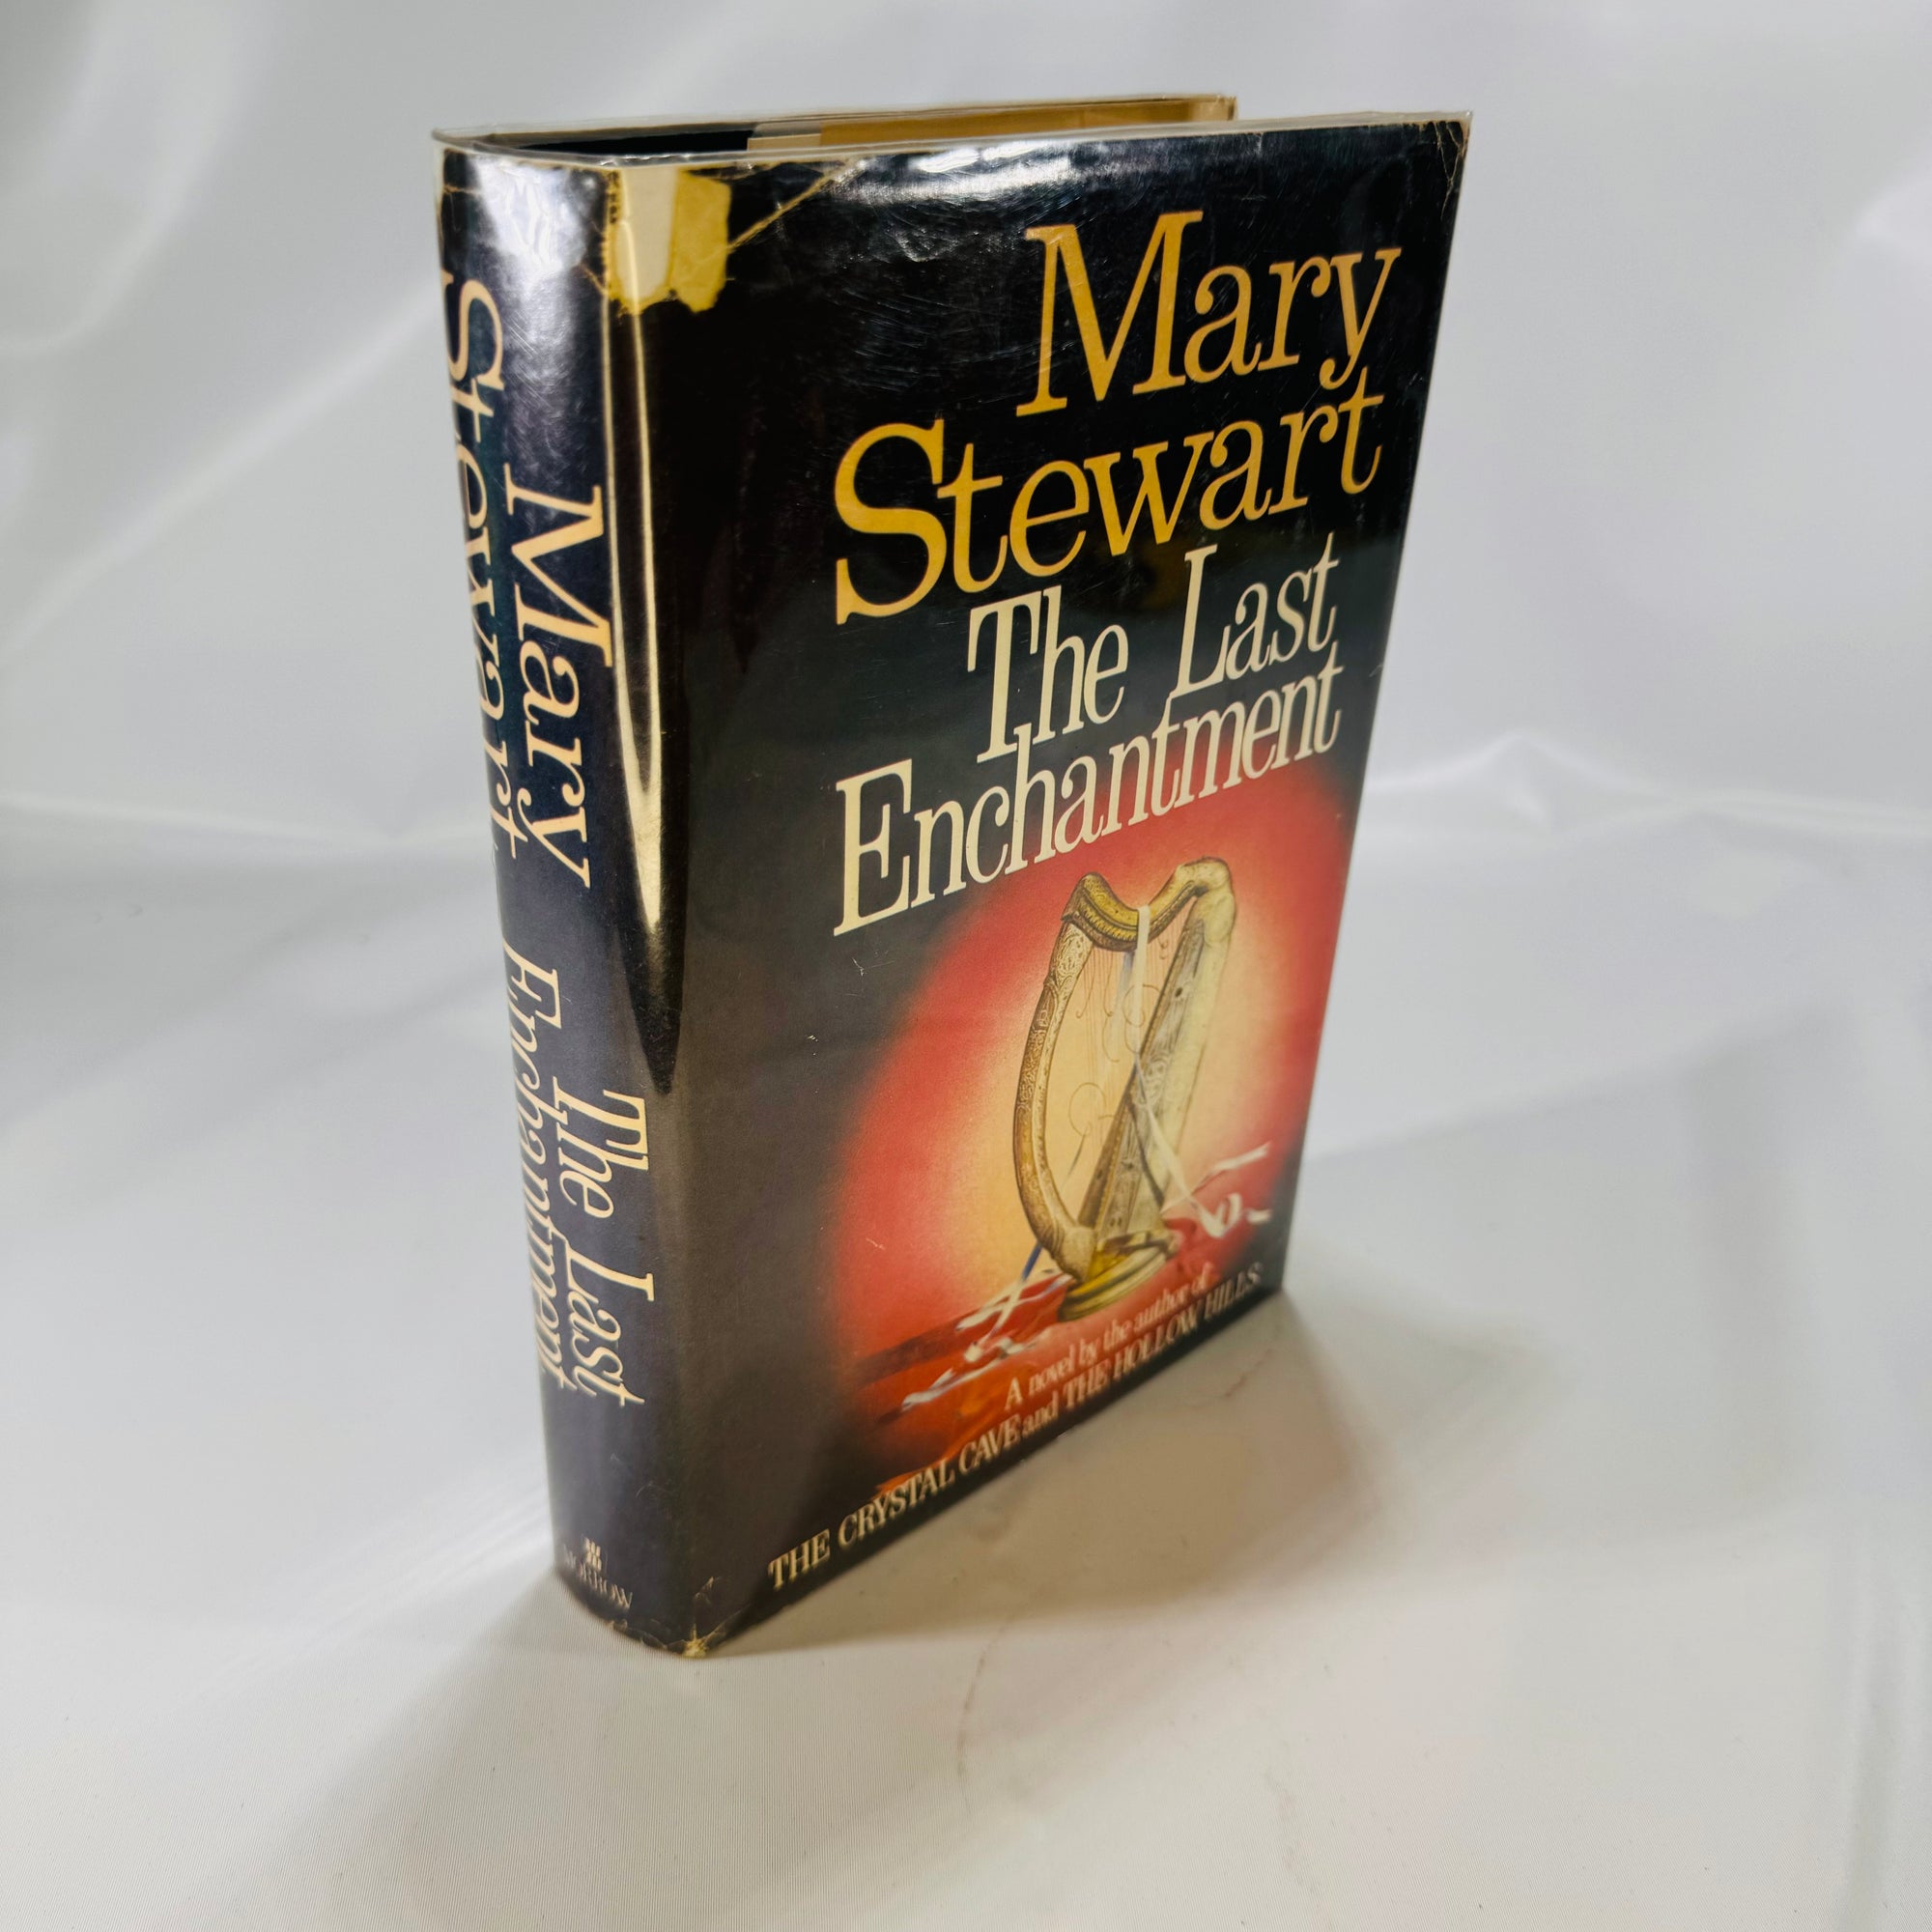 The Last Enchantment by Mary Stewart 1979 William Morrow and Company